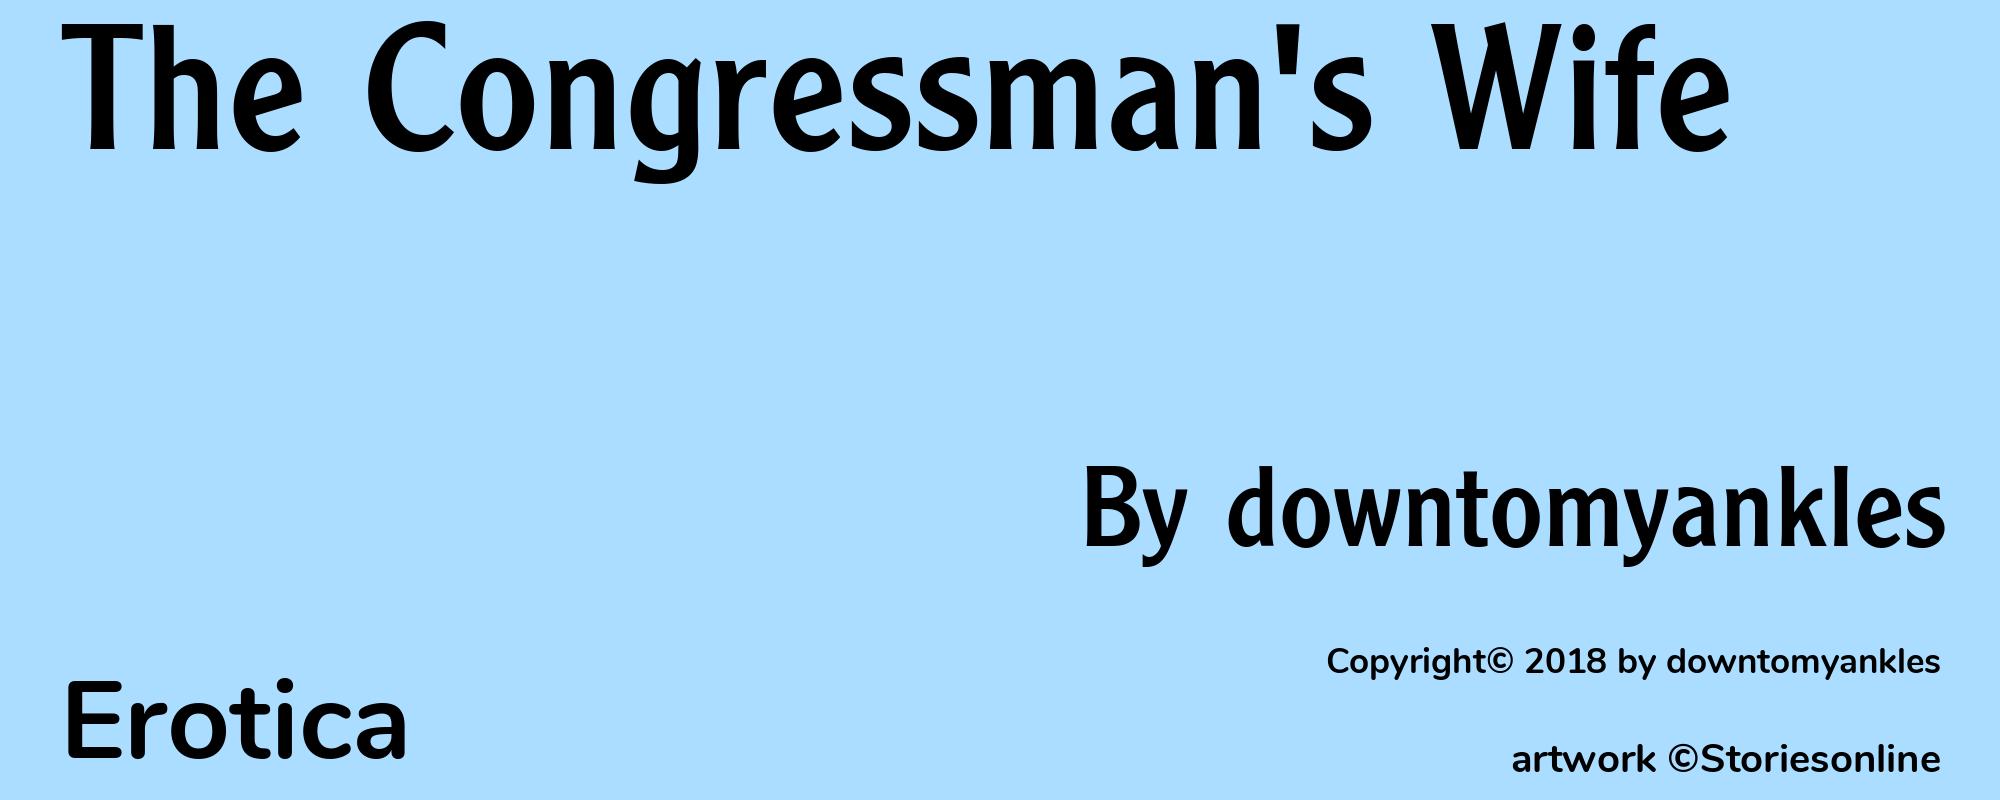 The Congressman's Wife - Cover